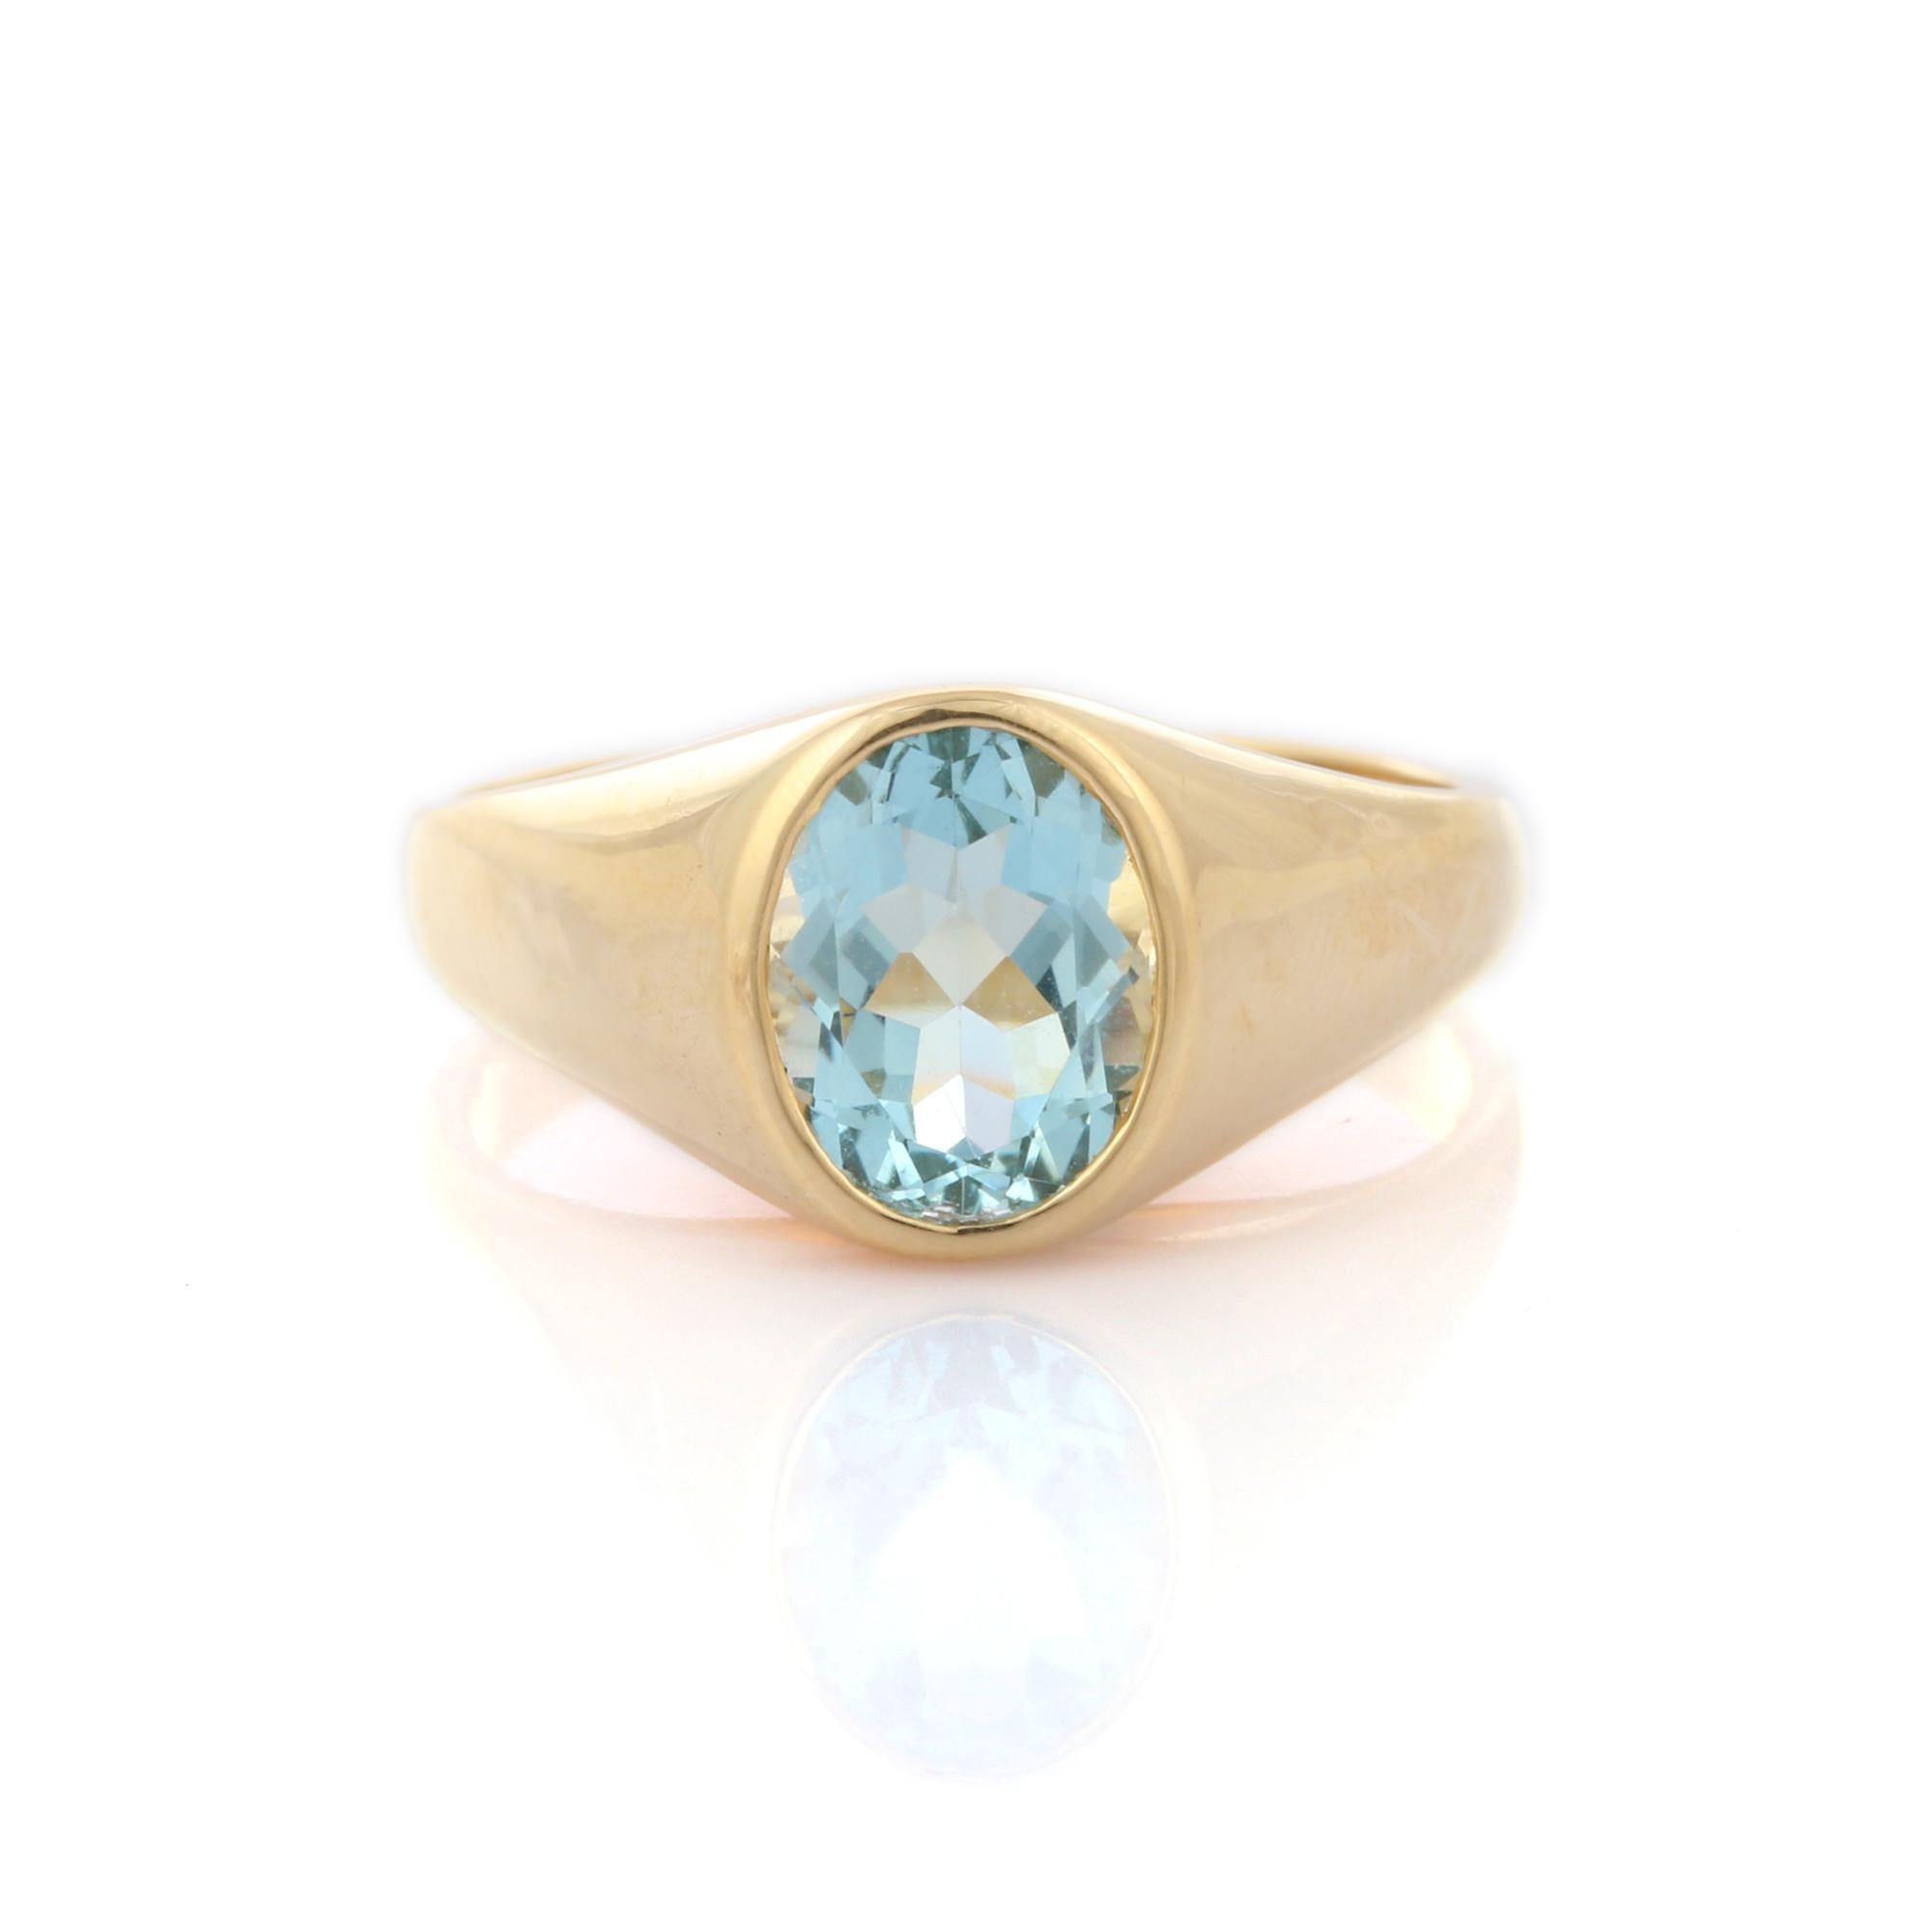 For Sale:  14K Yellow Gold 1.62 Carat Oval Cut Aquamarine Engagement Ring 7